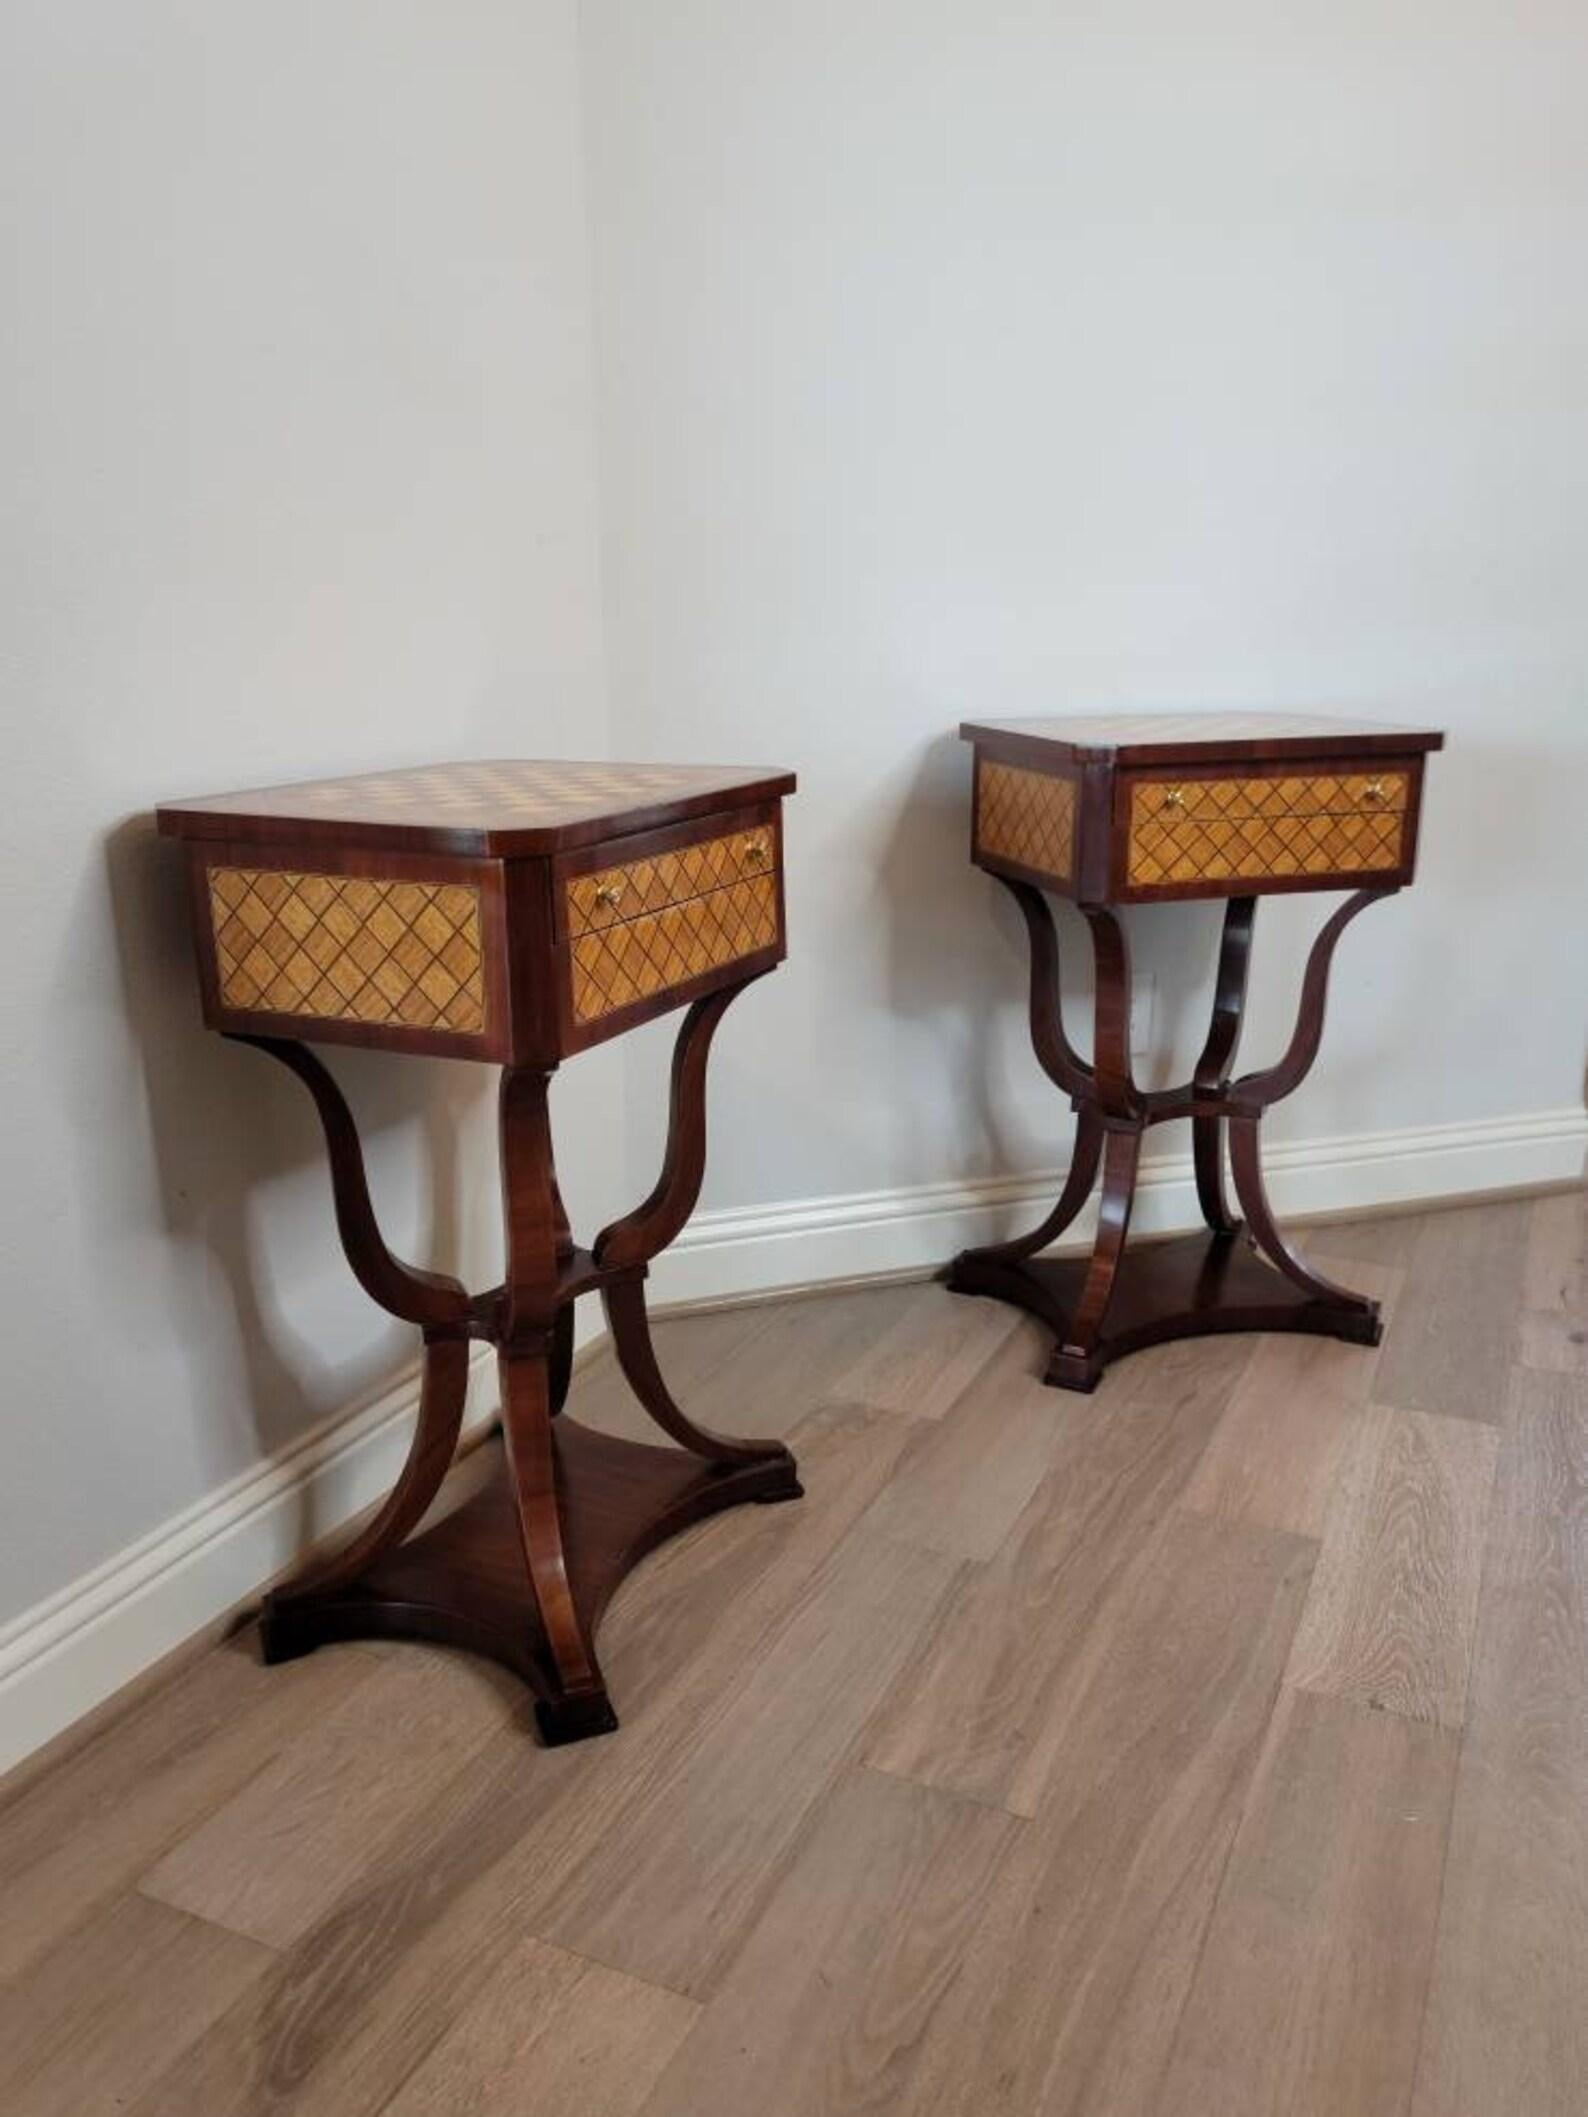 Pair of Italian Neoclassical Chessboard Parquetry Inlaid Tables In Good Condition For Sale In Forney, TX